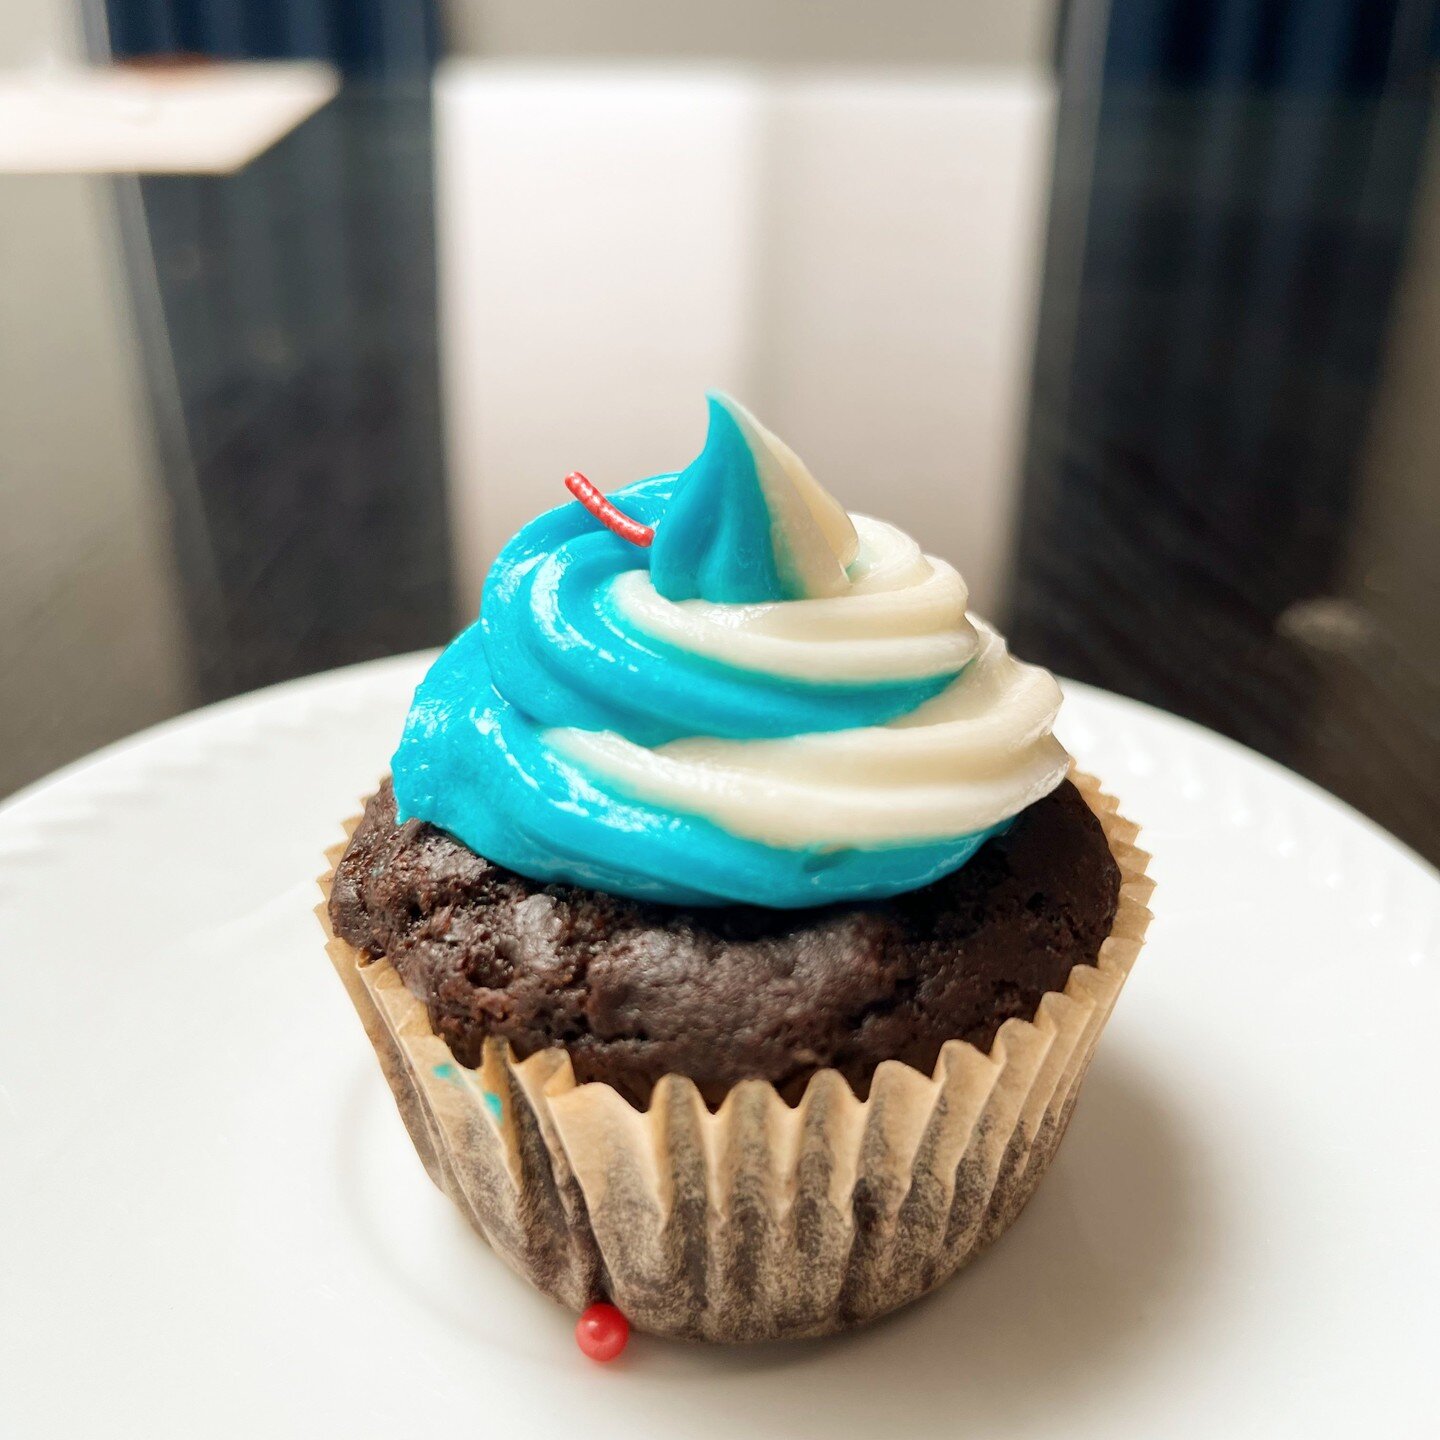 Happy late memorial day everyone!
Honor our heroes with these cupcakes! We have this beautiful blue and white frosting with red sprinkles that I ran out of mid-way--you know what they say! Baking is love-made edible!
# memorial day cupcakes!